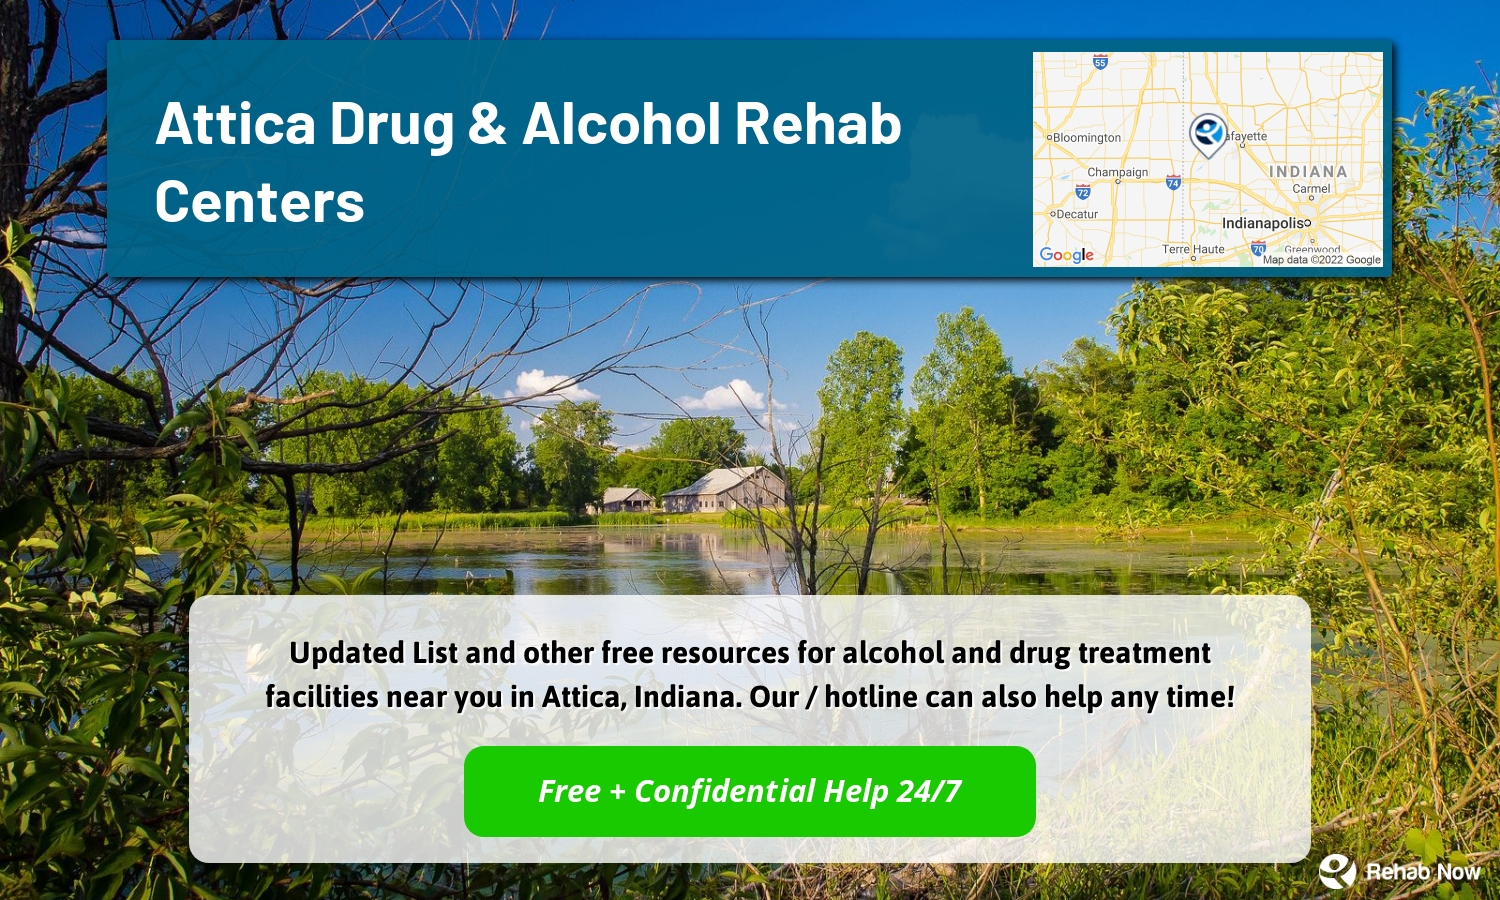  Updated List and other free resources for alcohol and drug treatment facilities near you in Attica, Indiana. Our / hotline can also help any time!